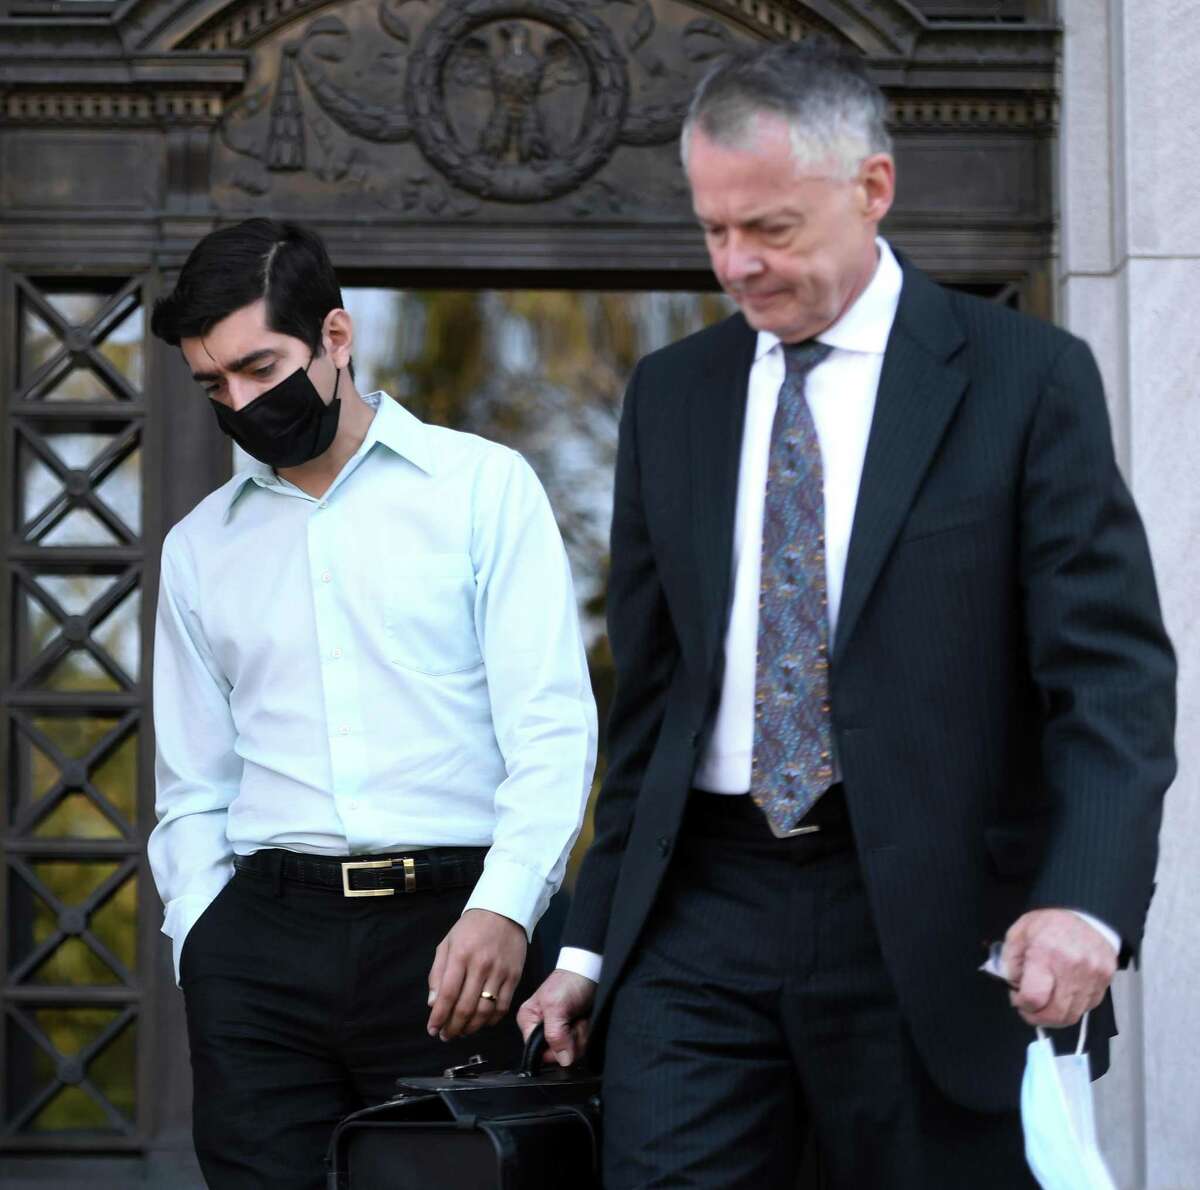 Former Connecticut state Rep. Michael DiMassa (left) leaves the federal courthouse in New Haven with his attorney, John Gulash, following his arrest on one count of wire fraud on Oct. 20, 2021.